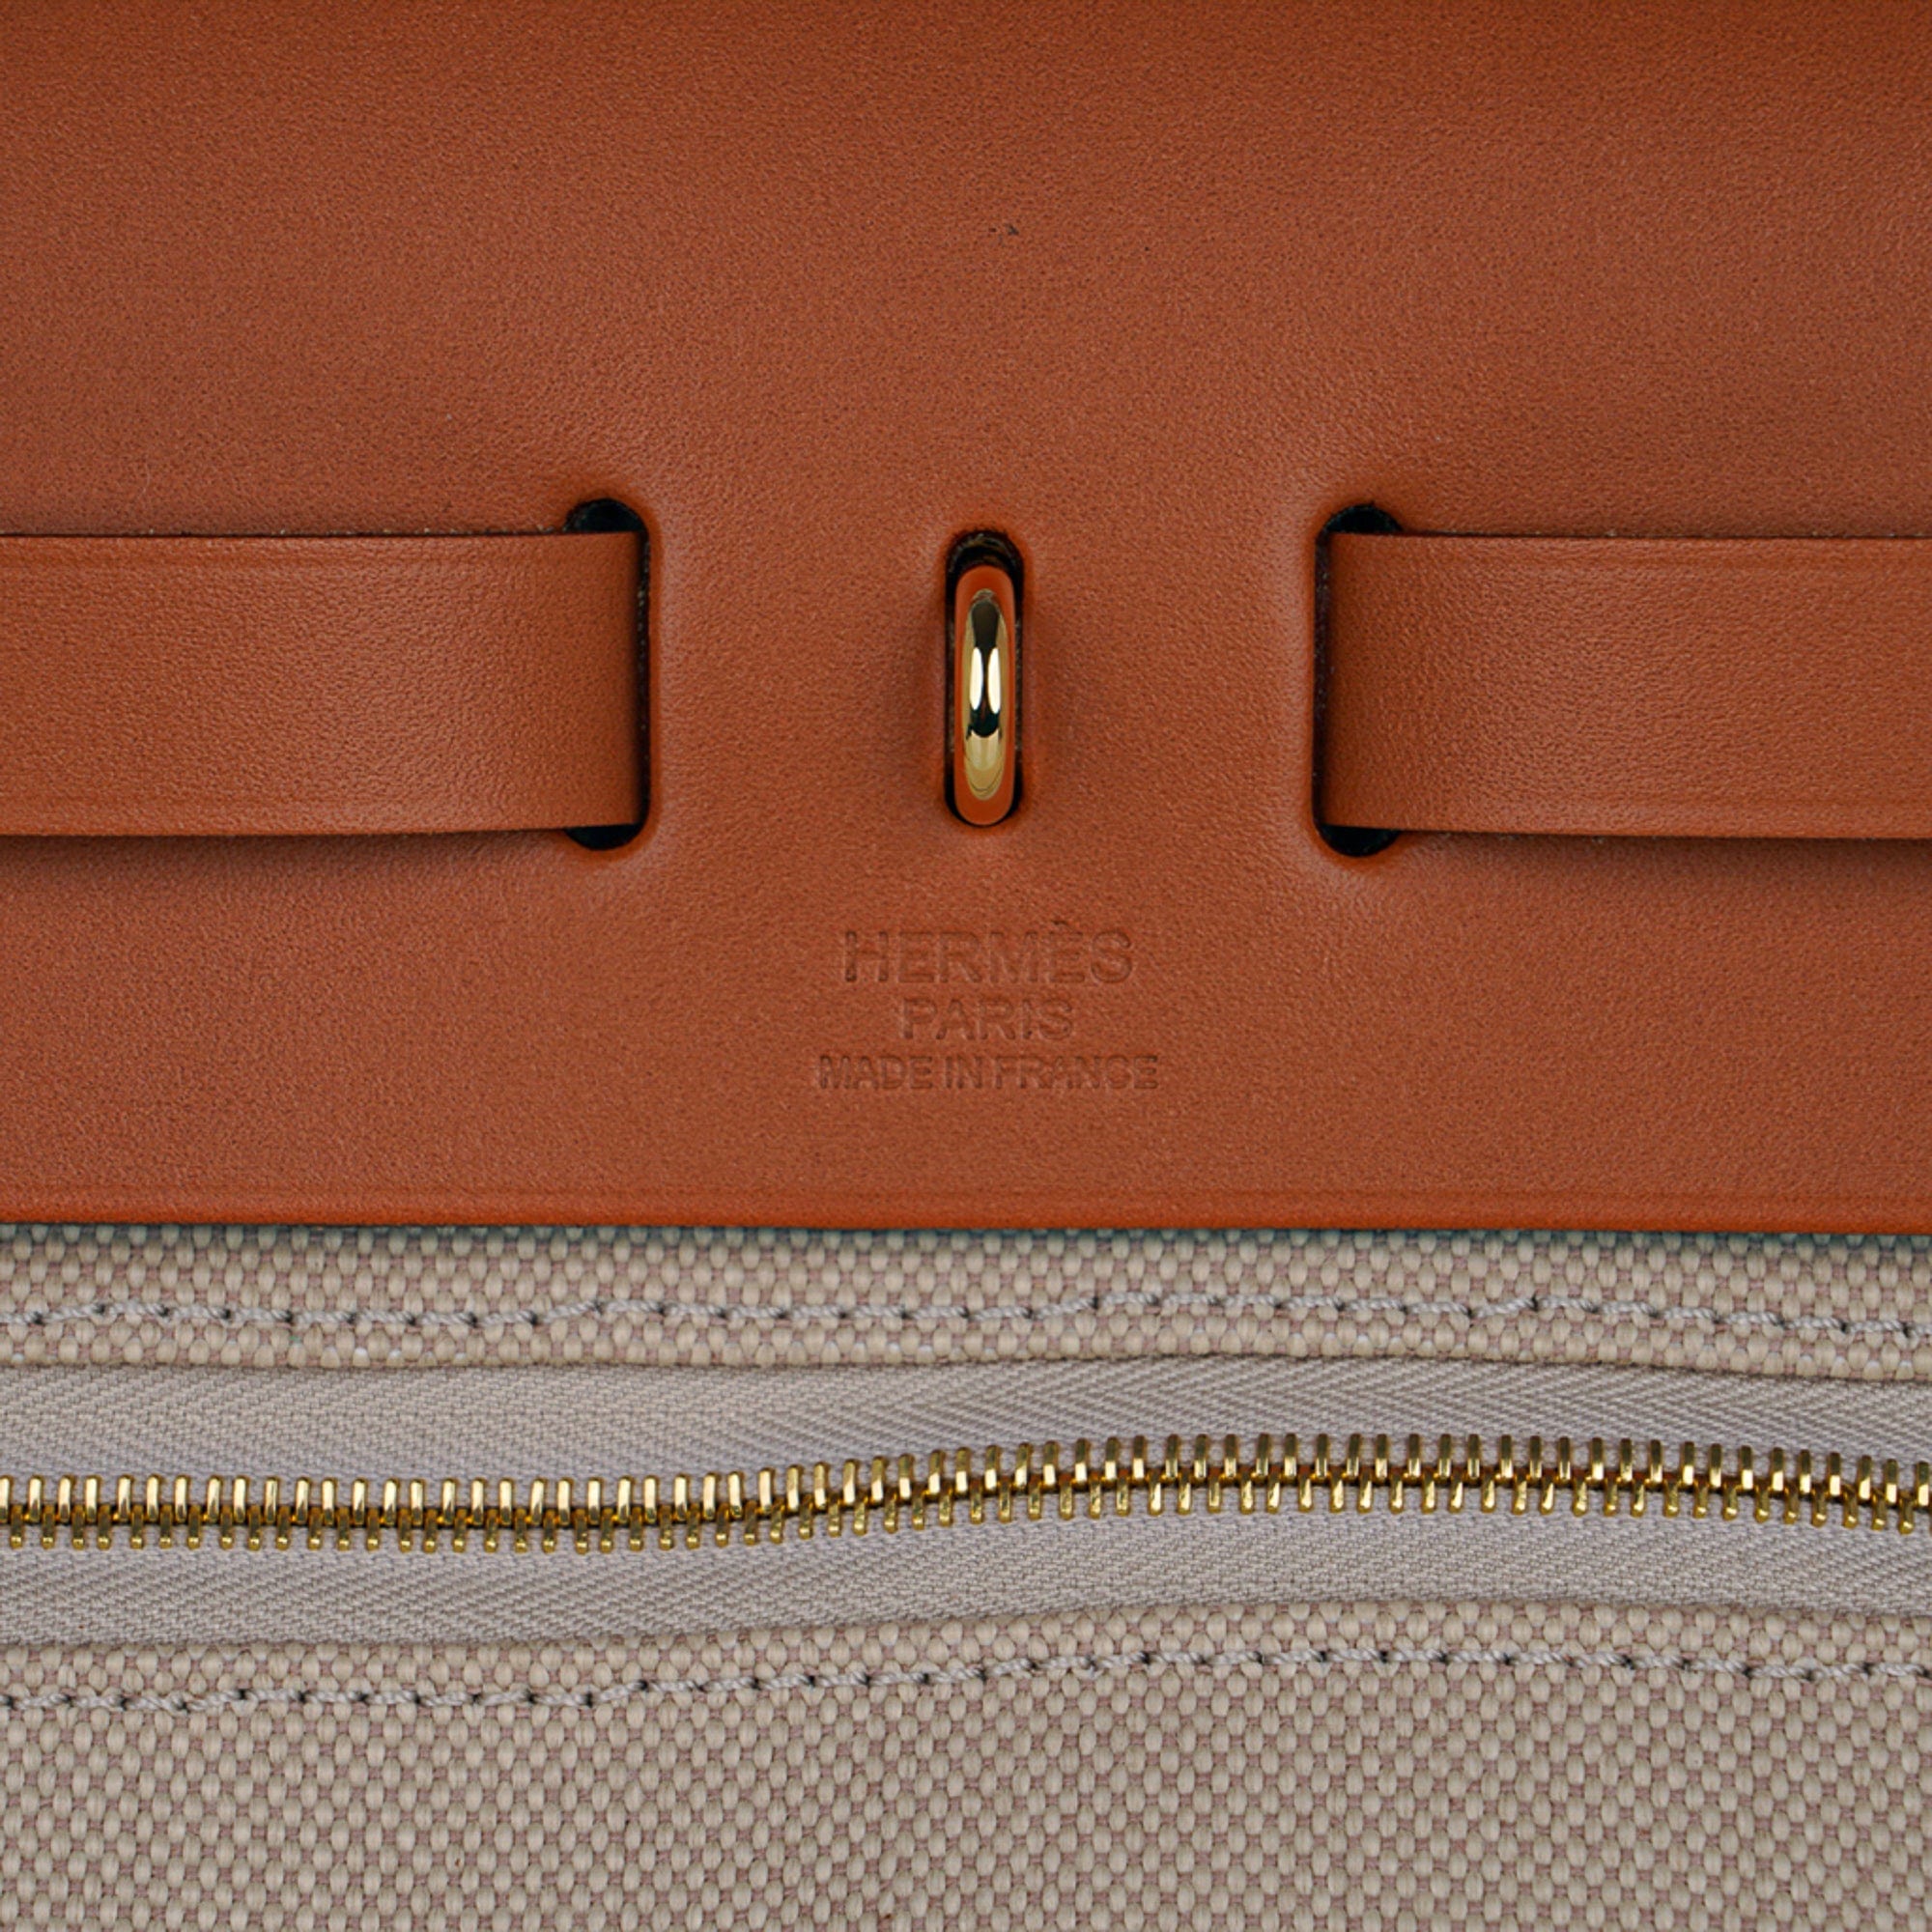 Hermès Herbag Zip Retourne 31 Pm In Beton Toile And Naturel/fauve Cuivre  Vache Hunter Leather in Pink